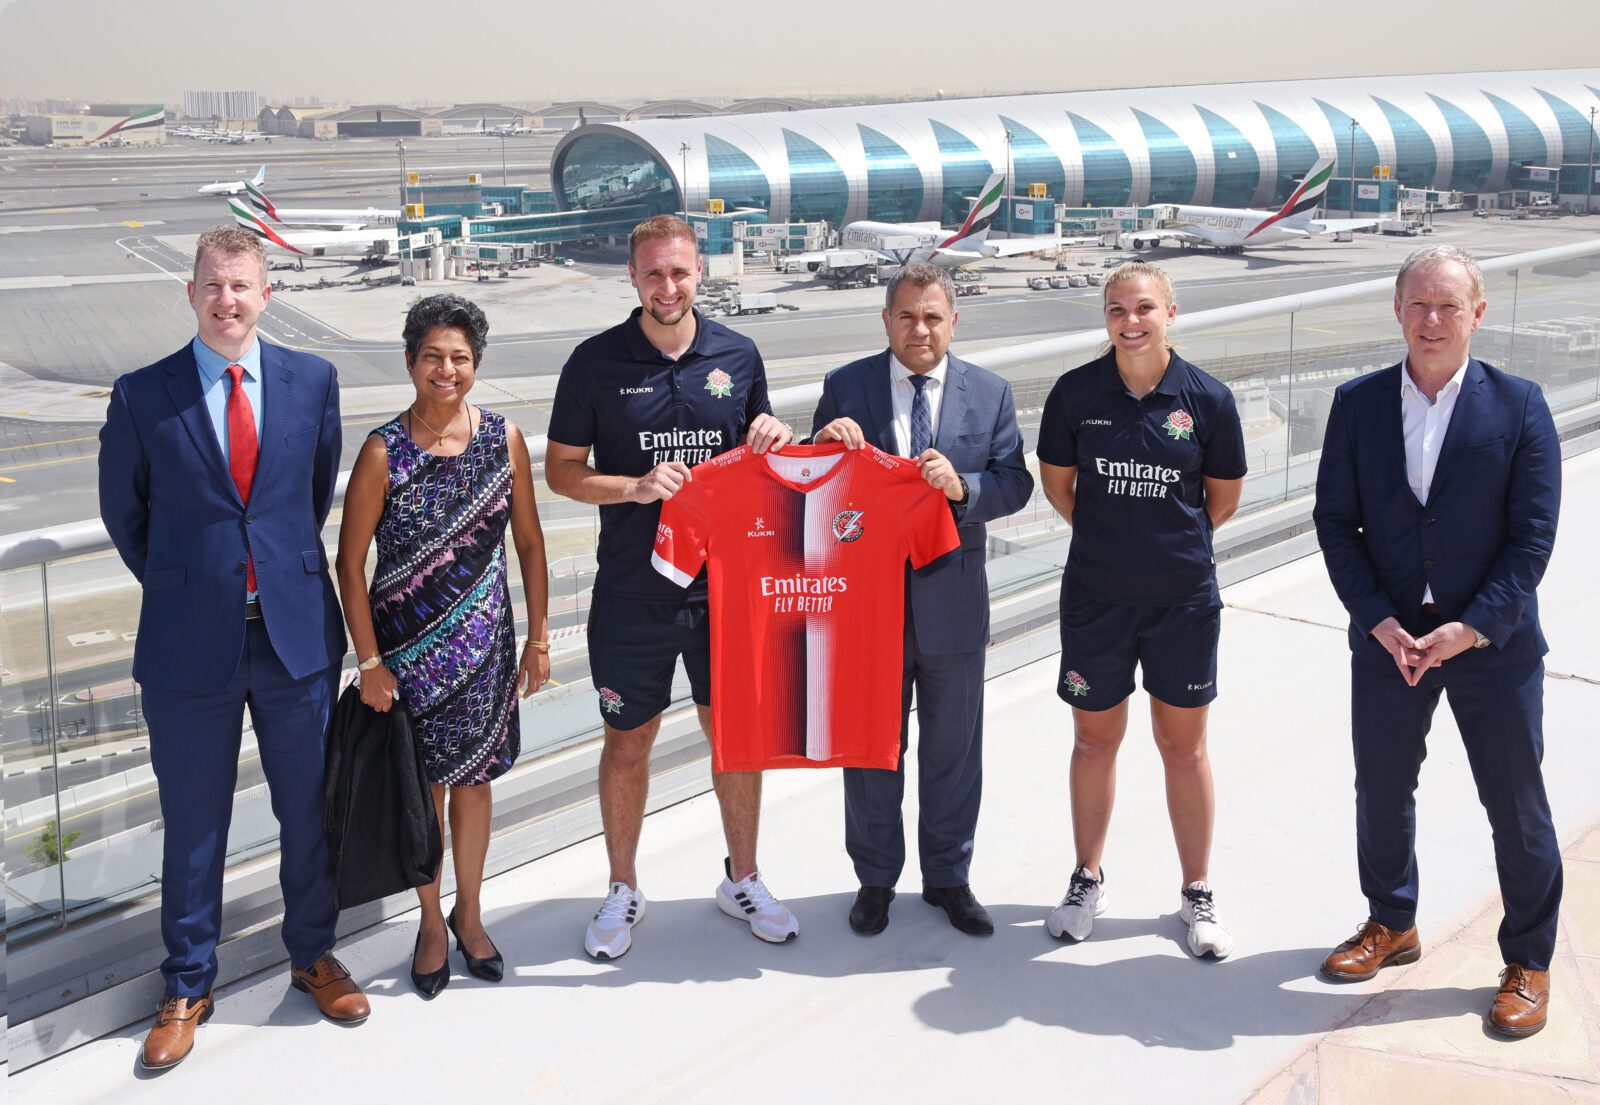 Lancashire Cricket signs new long-term partnership extension with Emirates, The Manc